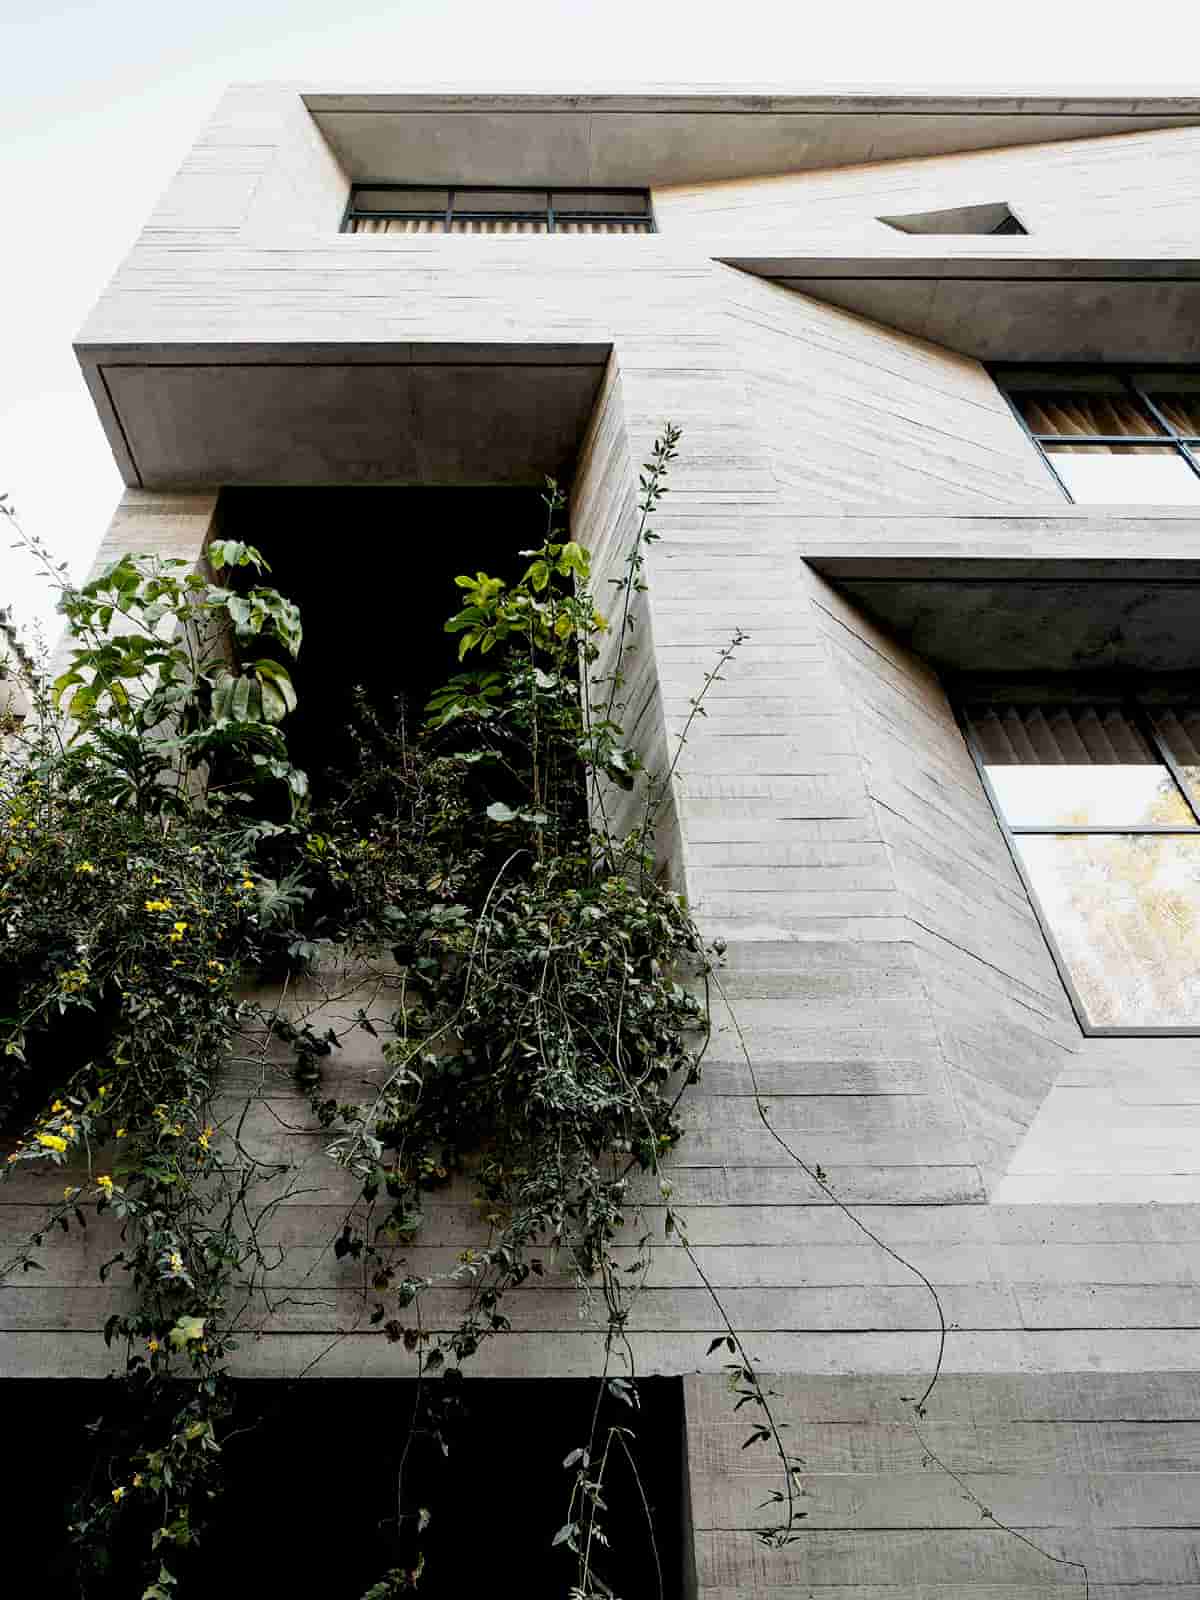 combines brutalist rigour with sculptural finesse in an apartment building in Mexico city